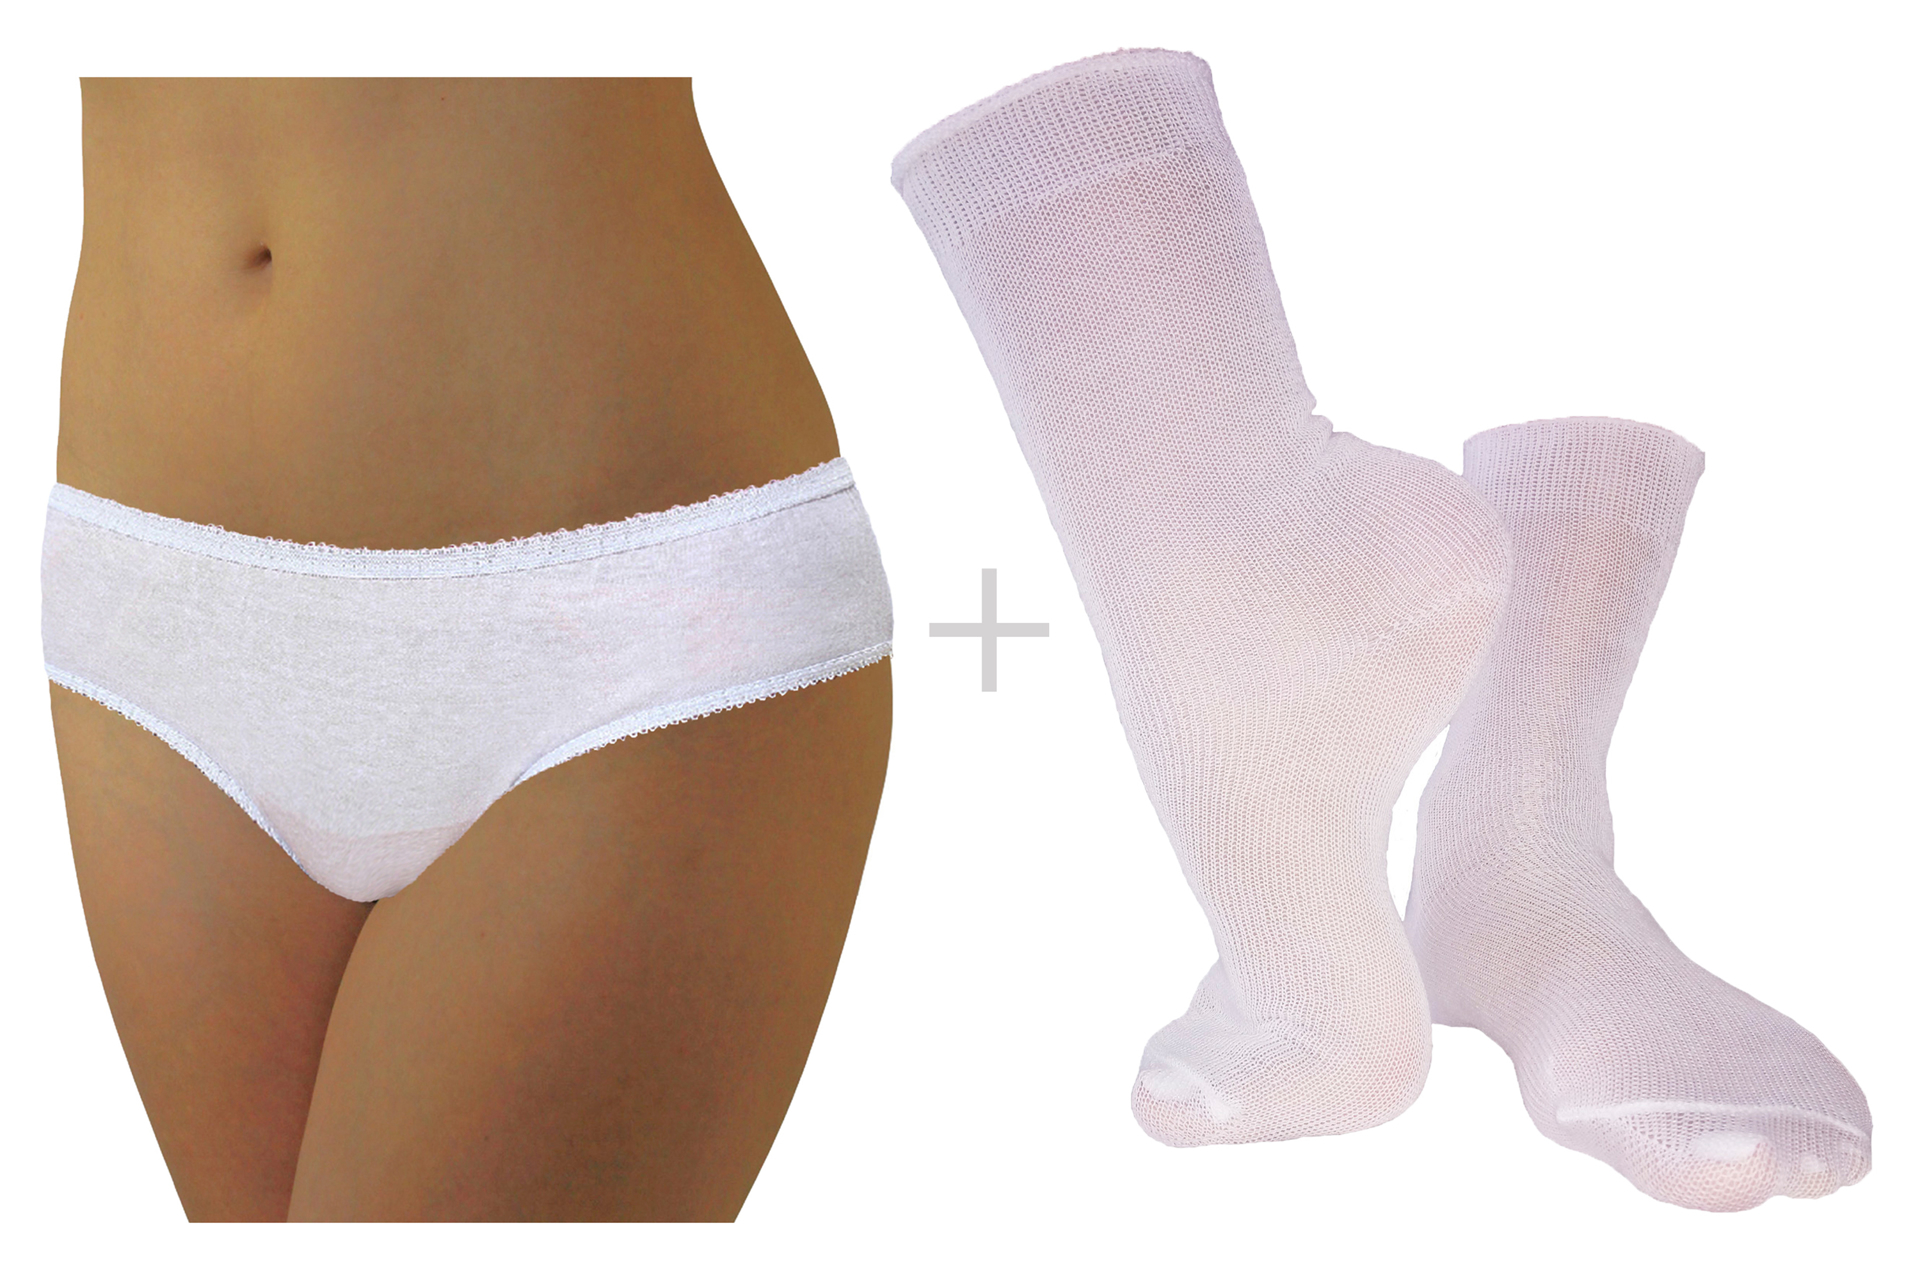 Best Deal for Women's Underwear Disposable Stays Disposable For Travel